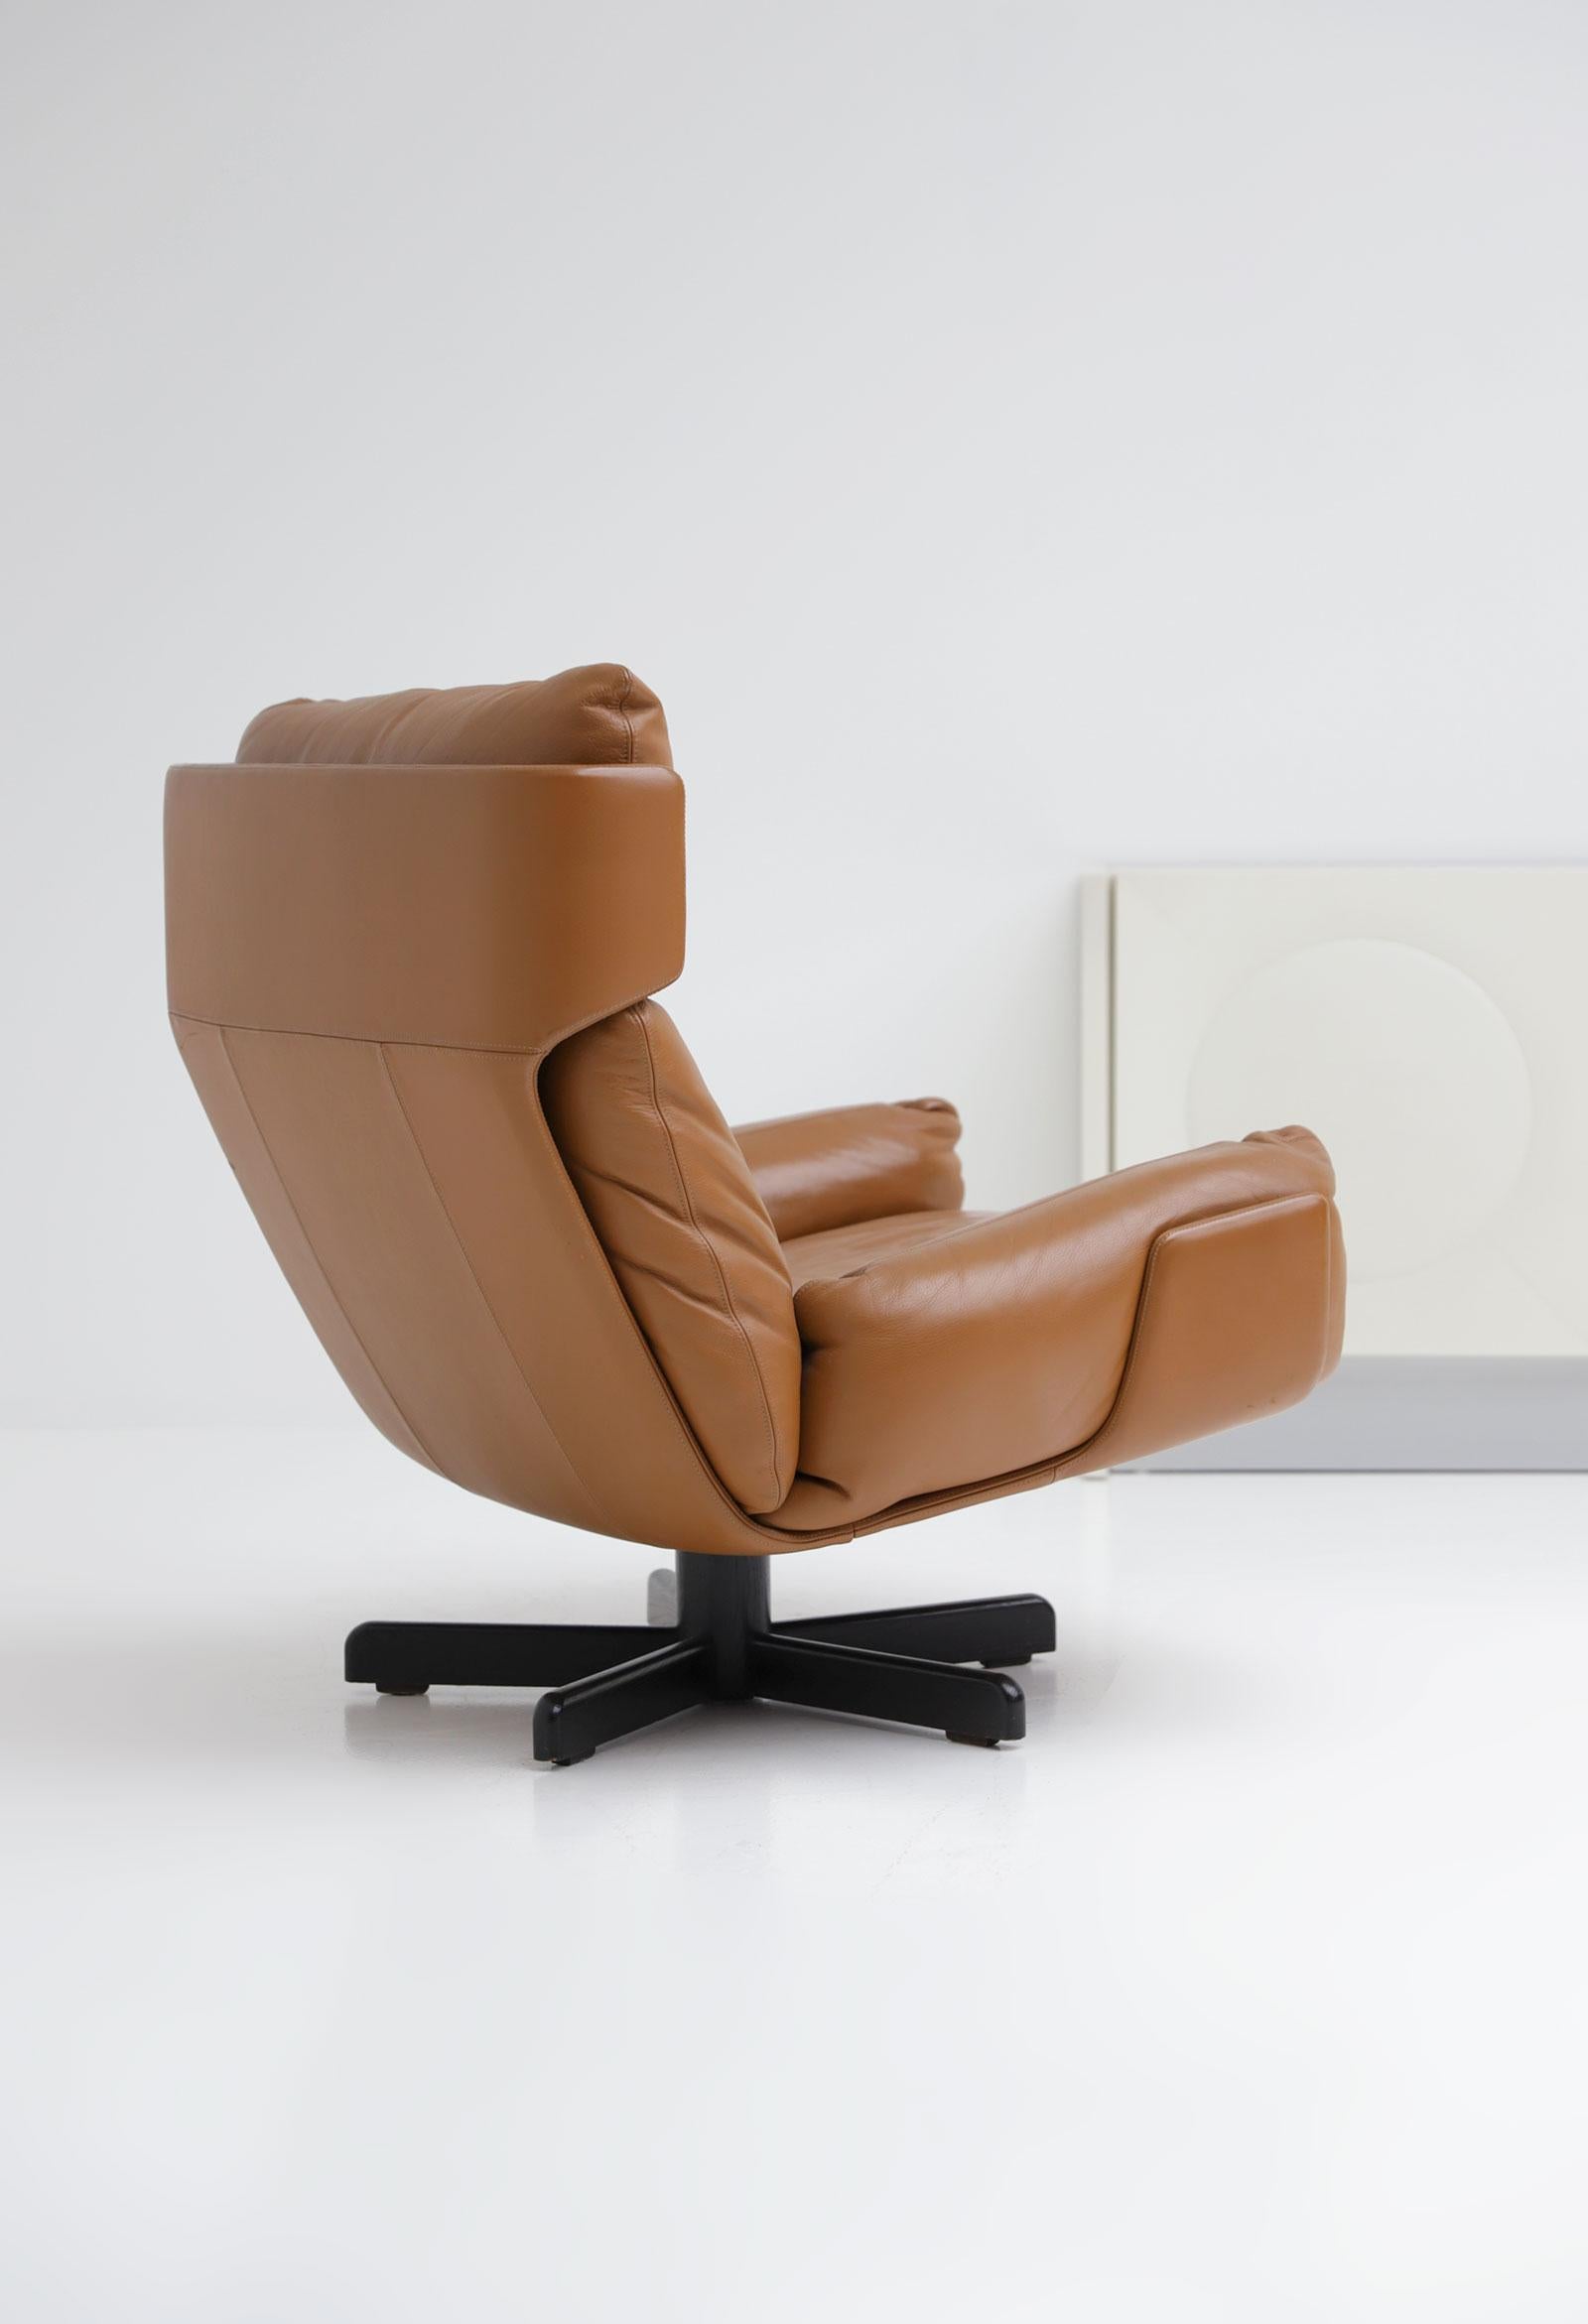 Durlet Lounge Chair 1976 Heiner Golz with Wood Base and Leather Seat In Excellent Condition For Sale In Antwerpen, Antwerp